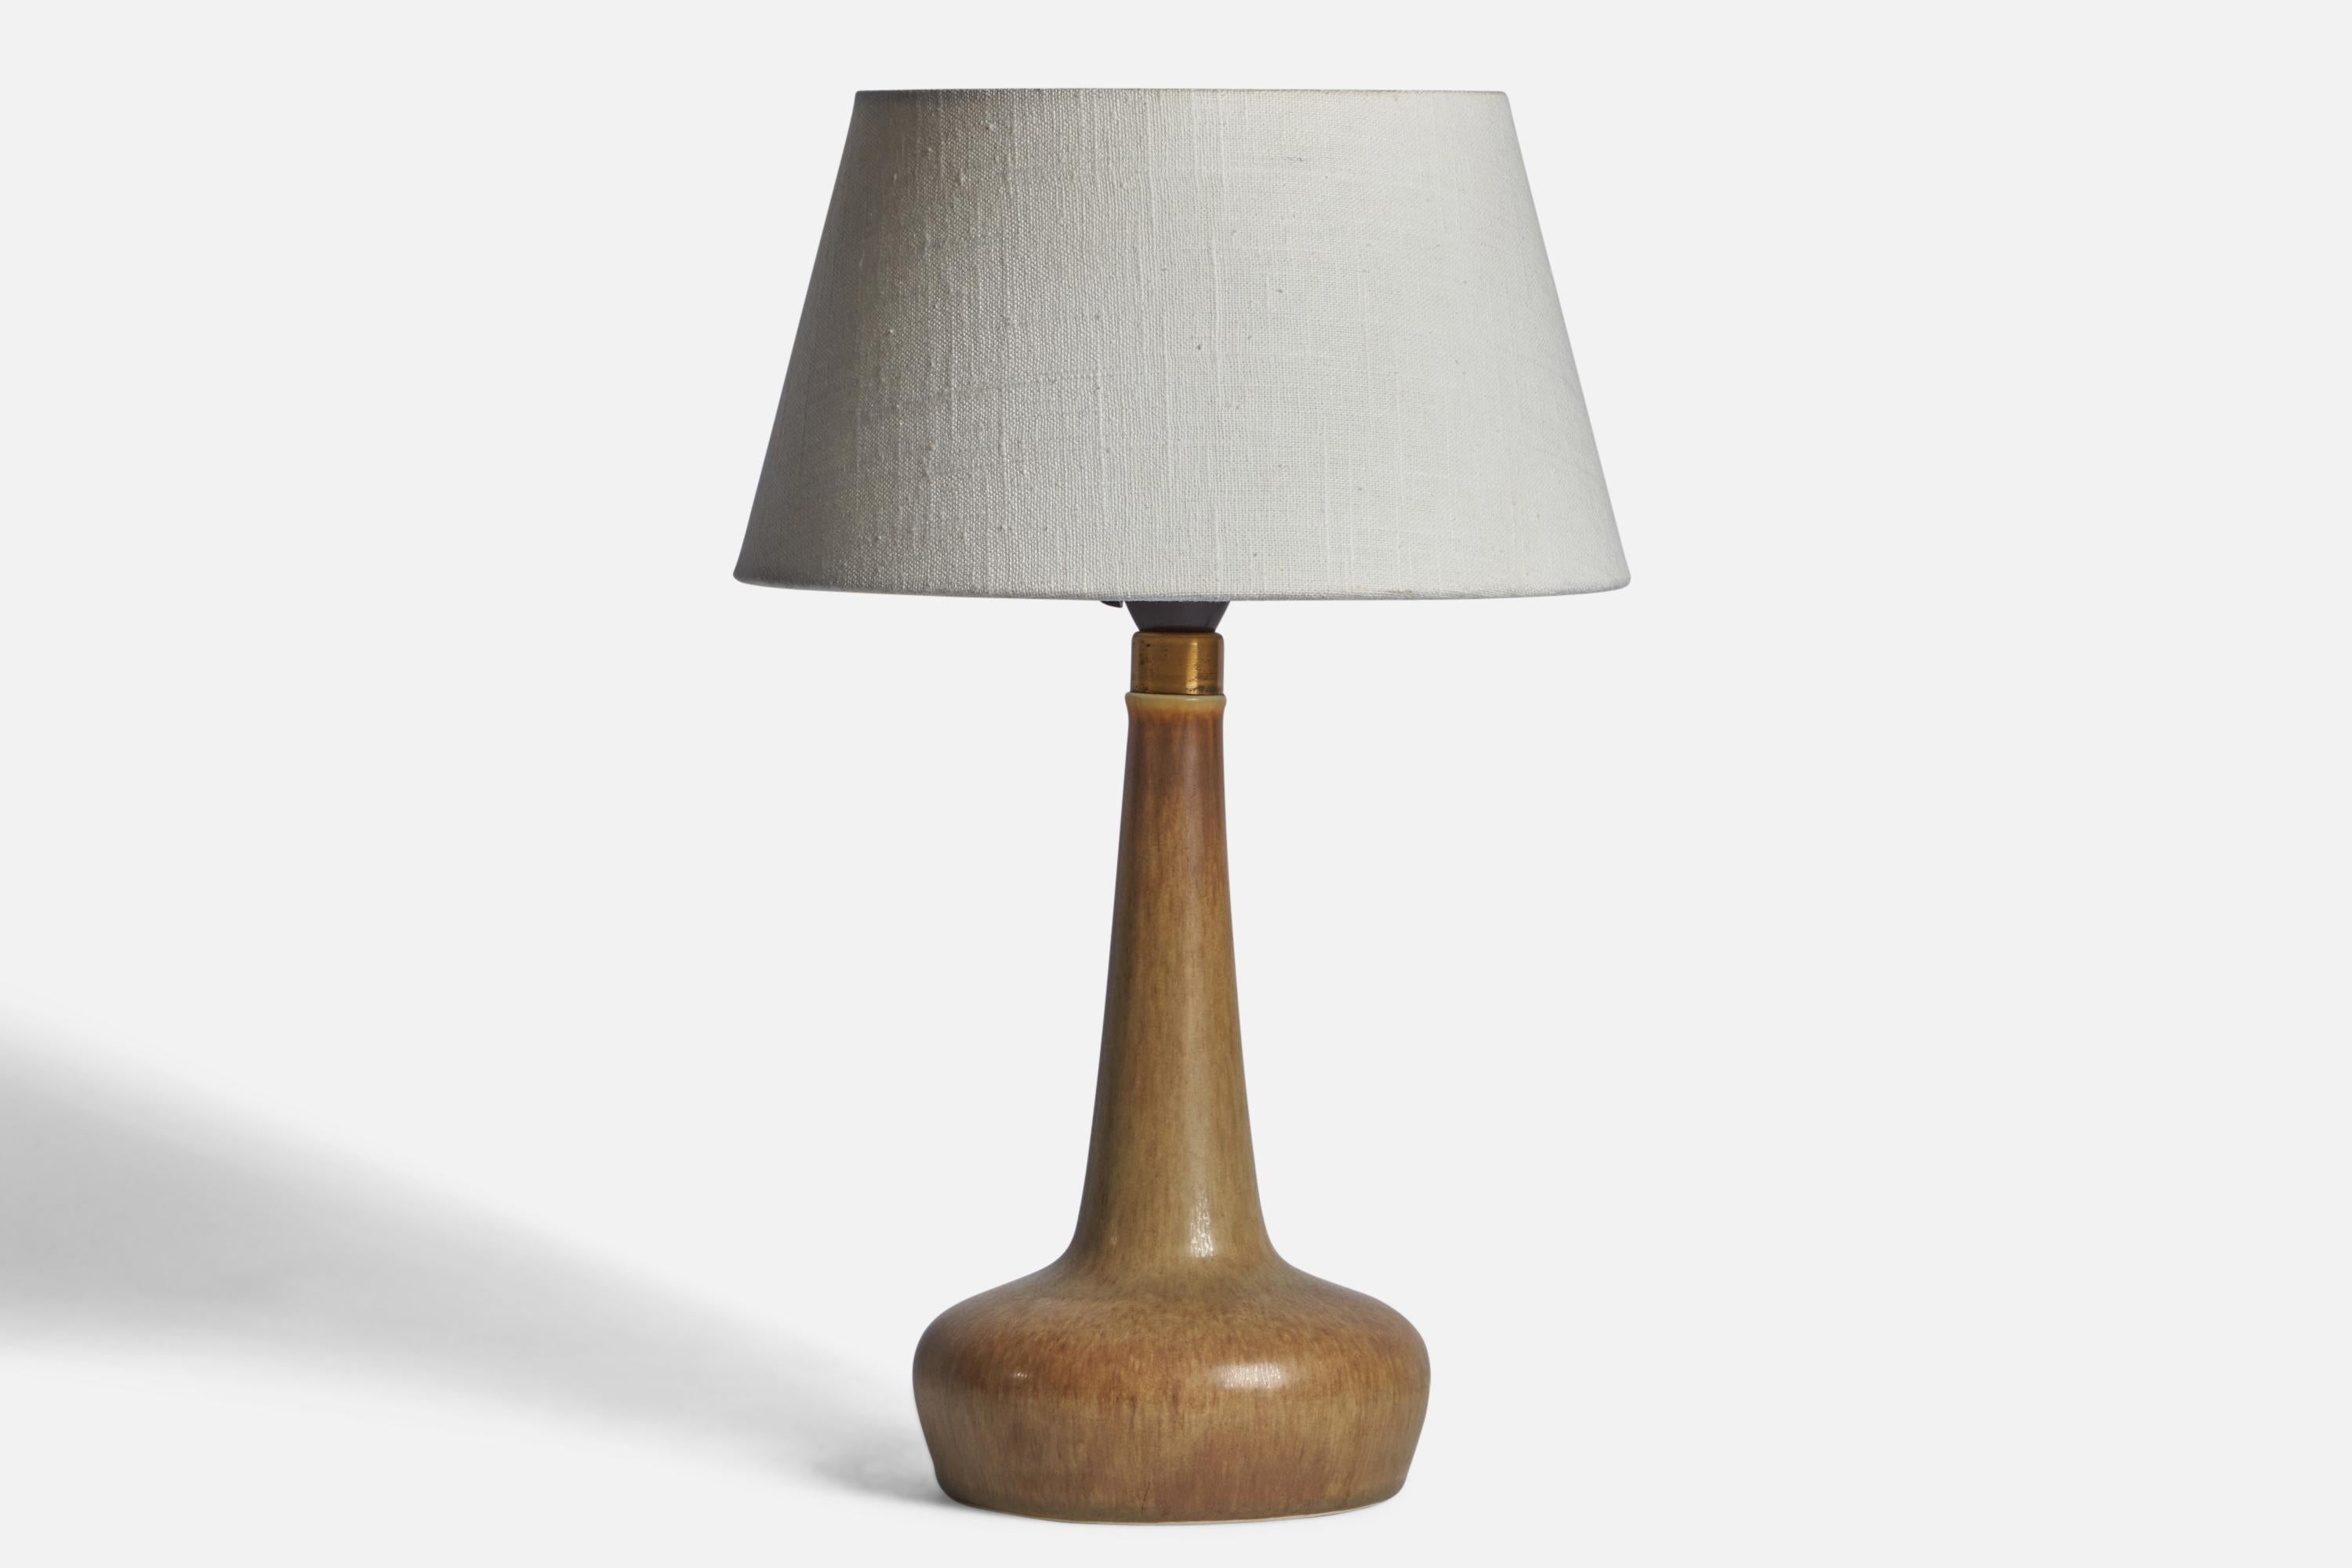 
A light beige-glazed stoneware table lamp designed by Per & Annelise Linneman-Schmidt and produced by Palshus, Denmark, 1960s
Dimensions of Lamp (inches): 12.75” H x 5.80” Diameter
Dimensions of Shade (inches): 7” Top Diameter x 10” Bottom Diameter